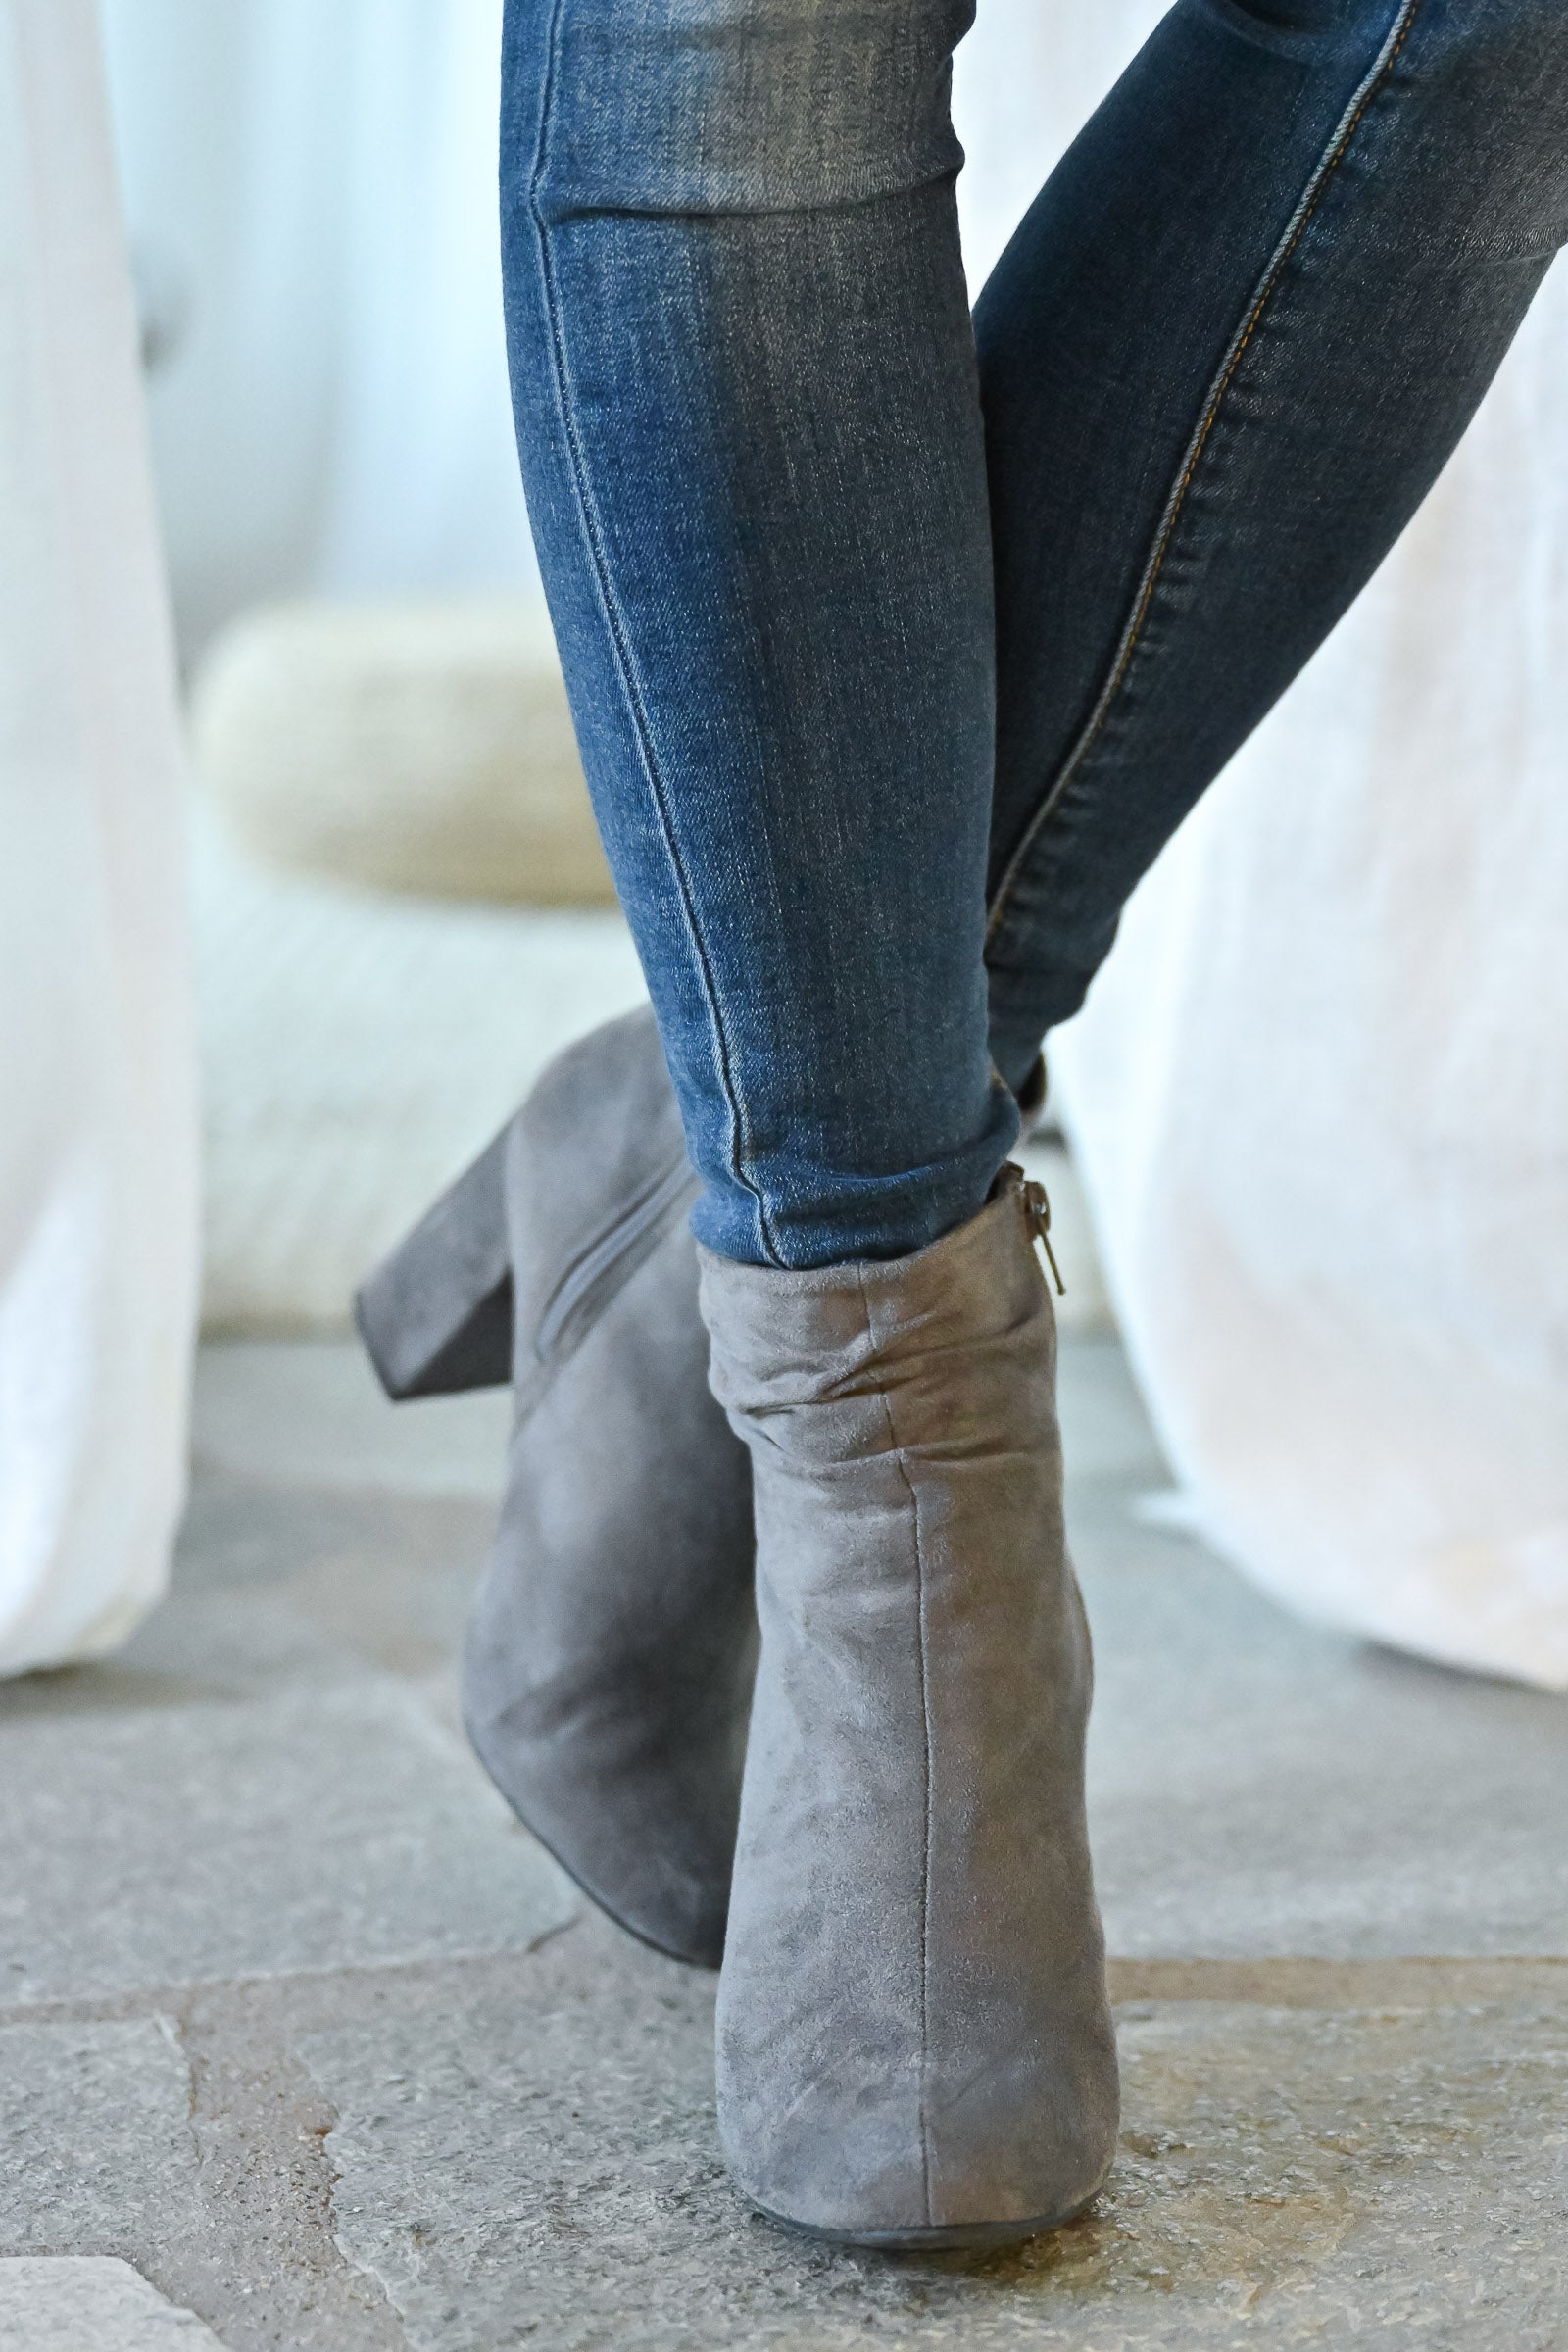 gray suede slouch boots